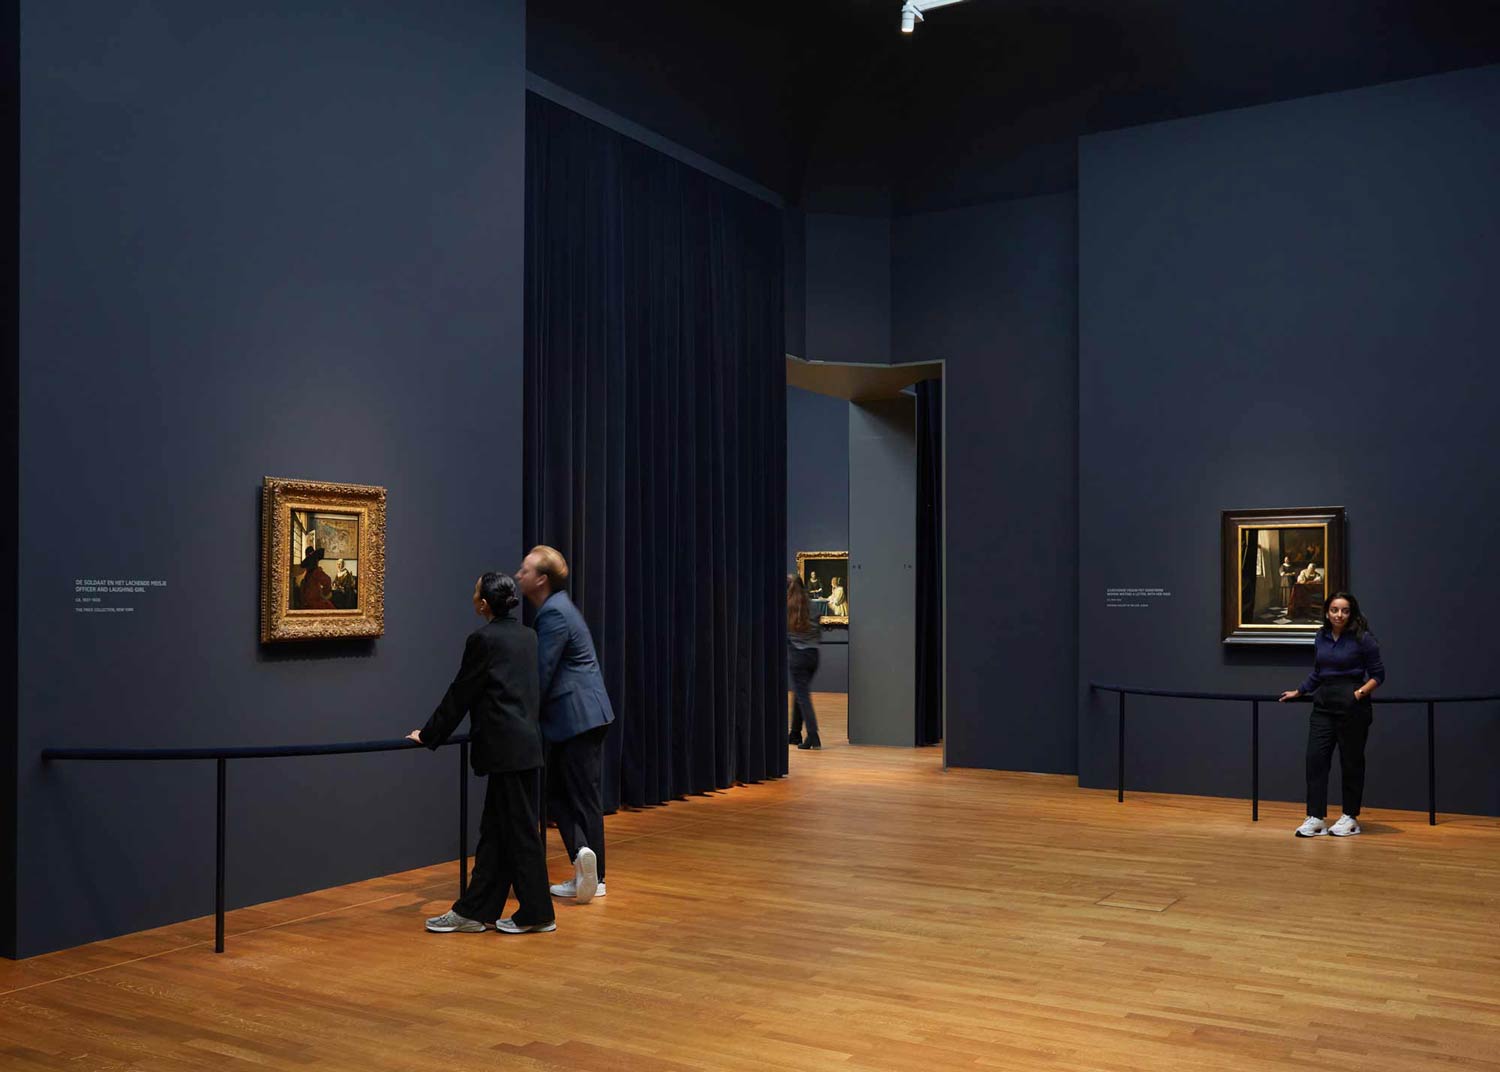 Visitors looking at paintings hanging in a gallery with blue walls